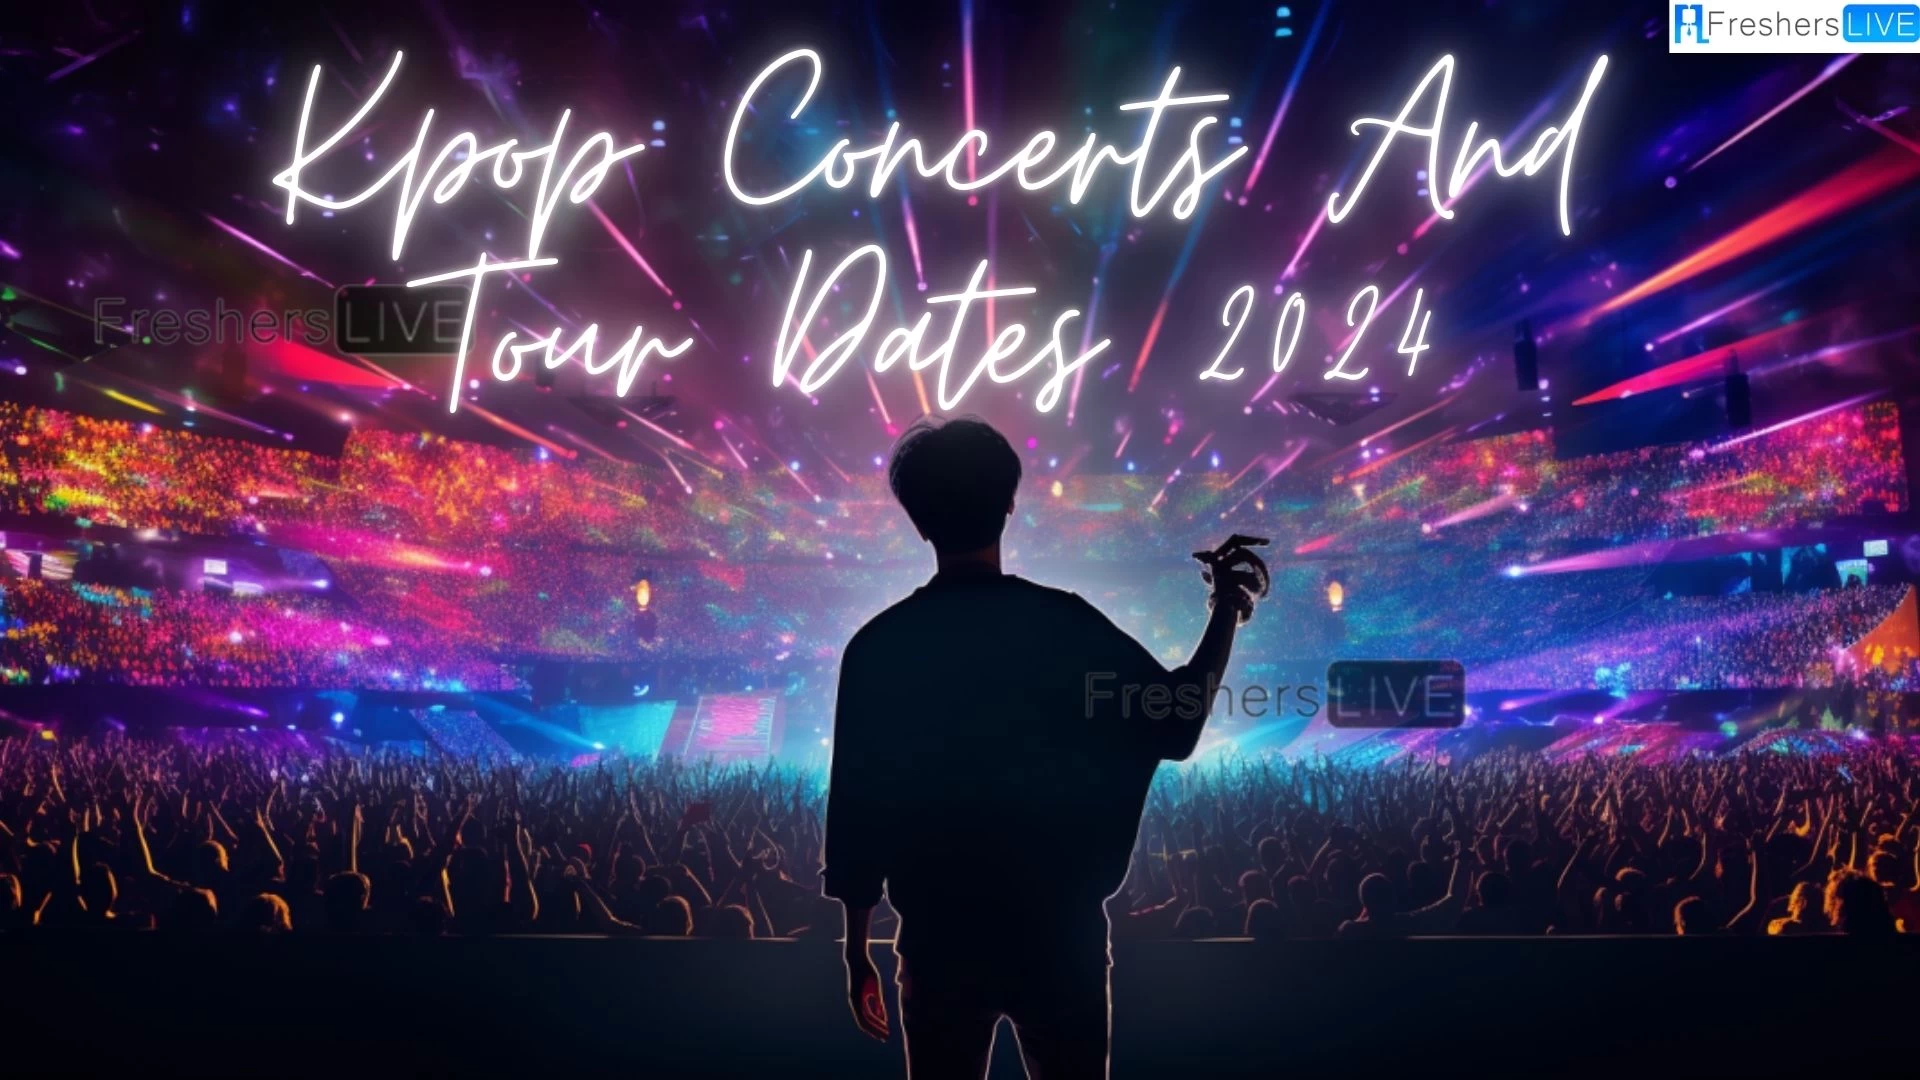 Kpop Concerts and Tour Dates 2024, How to Get Kpop Concert Tickets 2024?